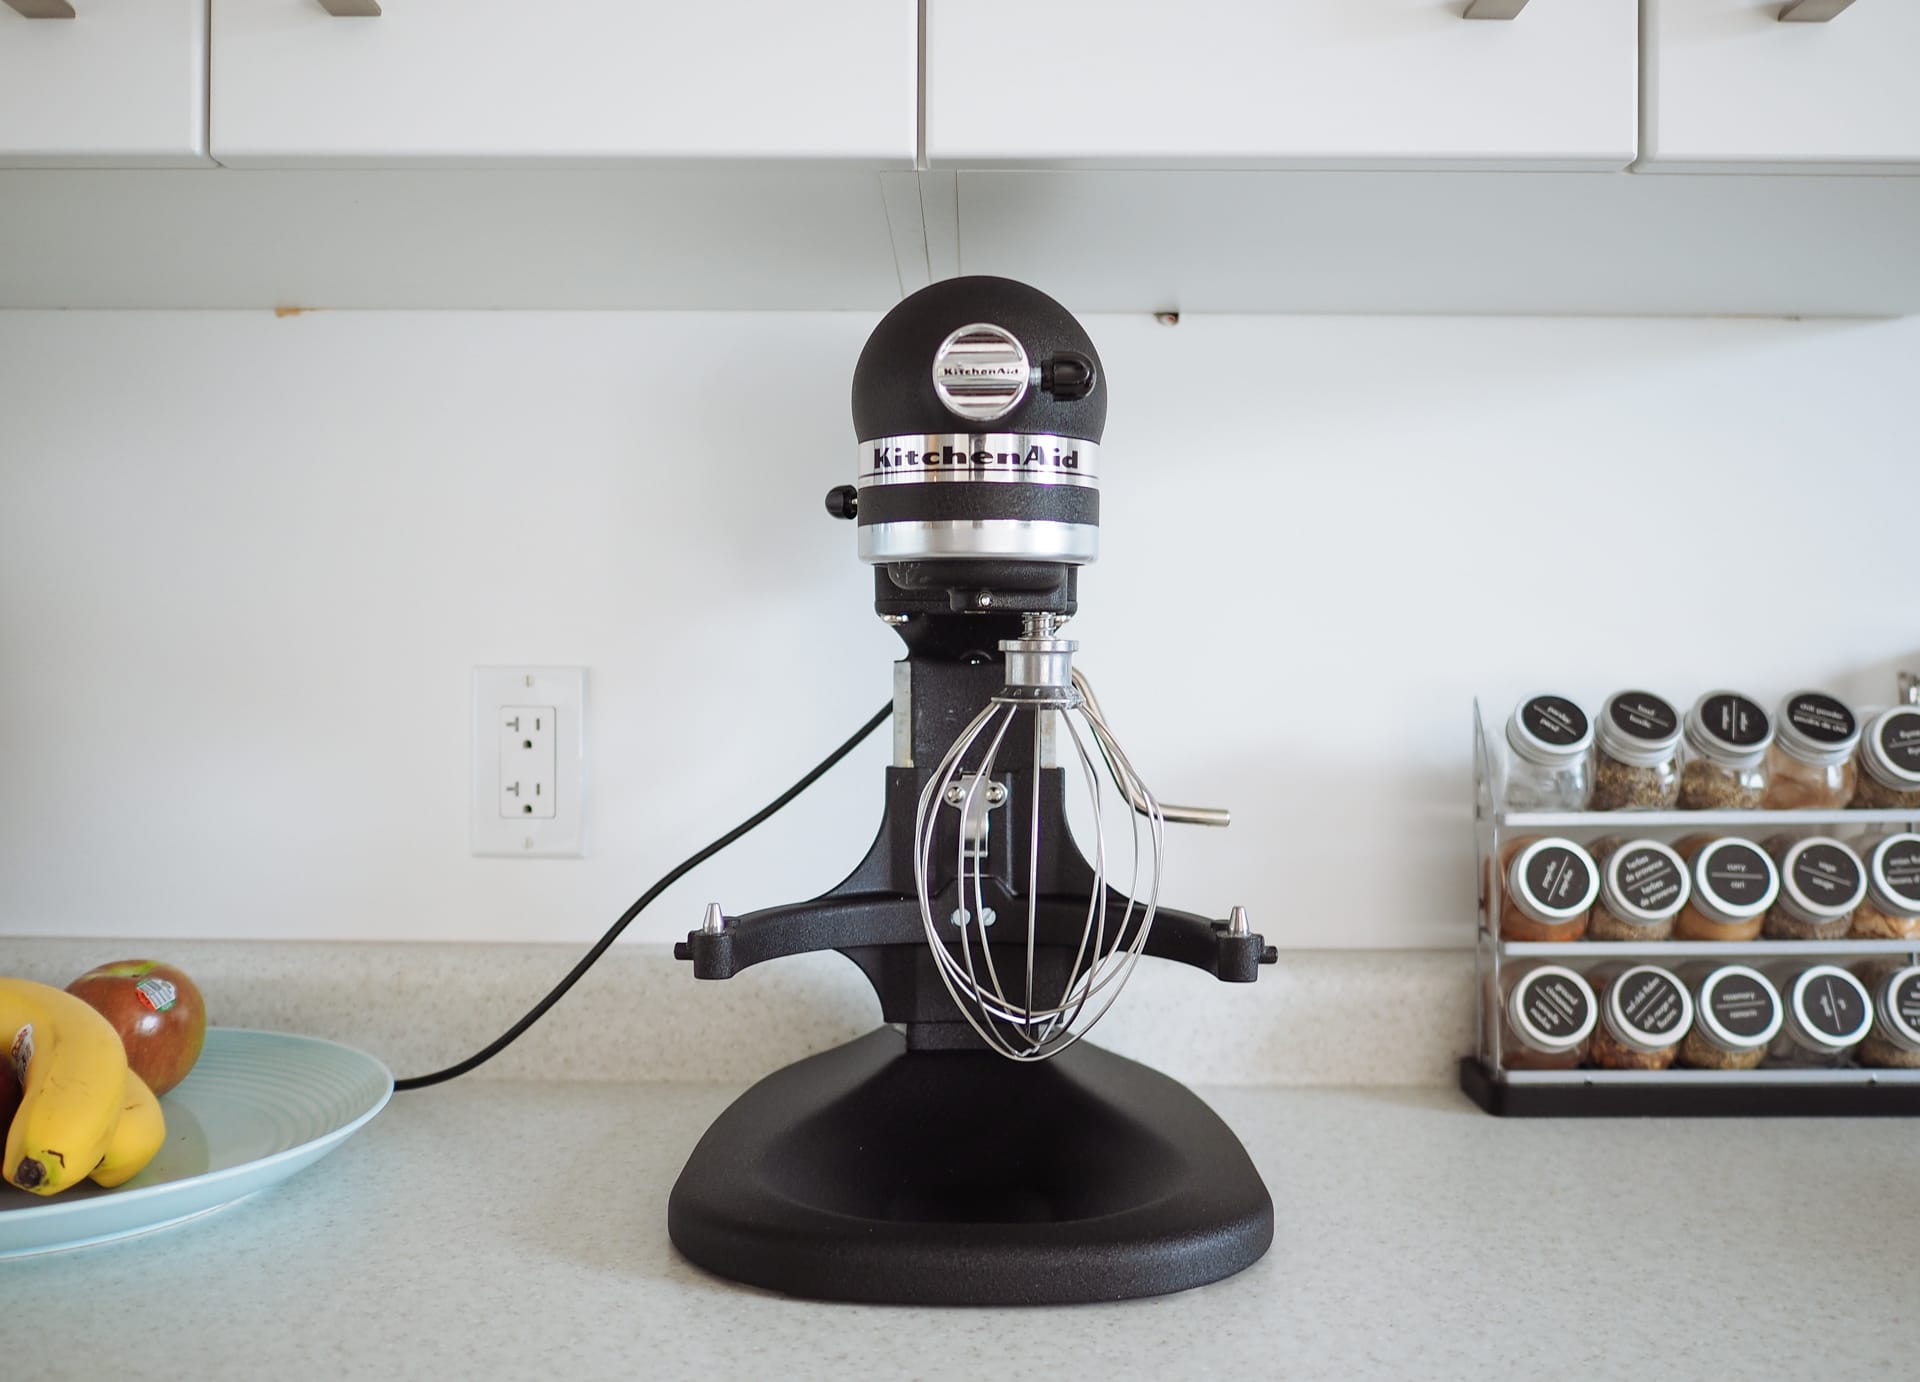 A Review of the KitchenAid Pro 450 Mixer — Tools and Toys